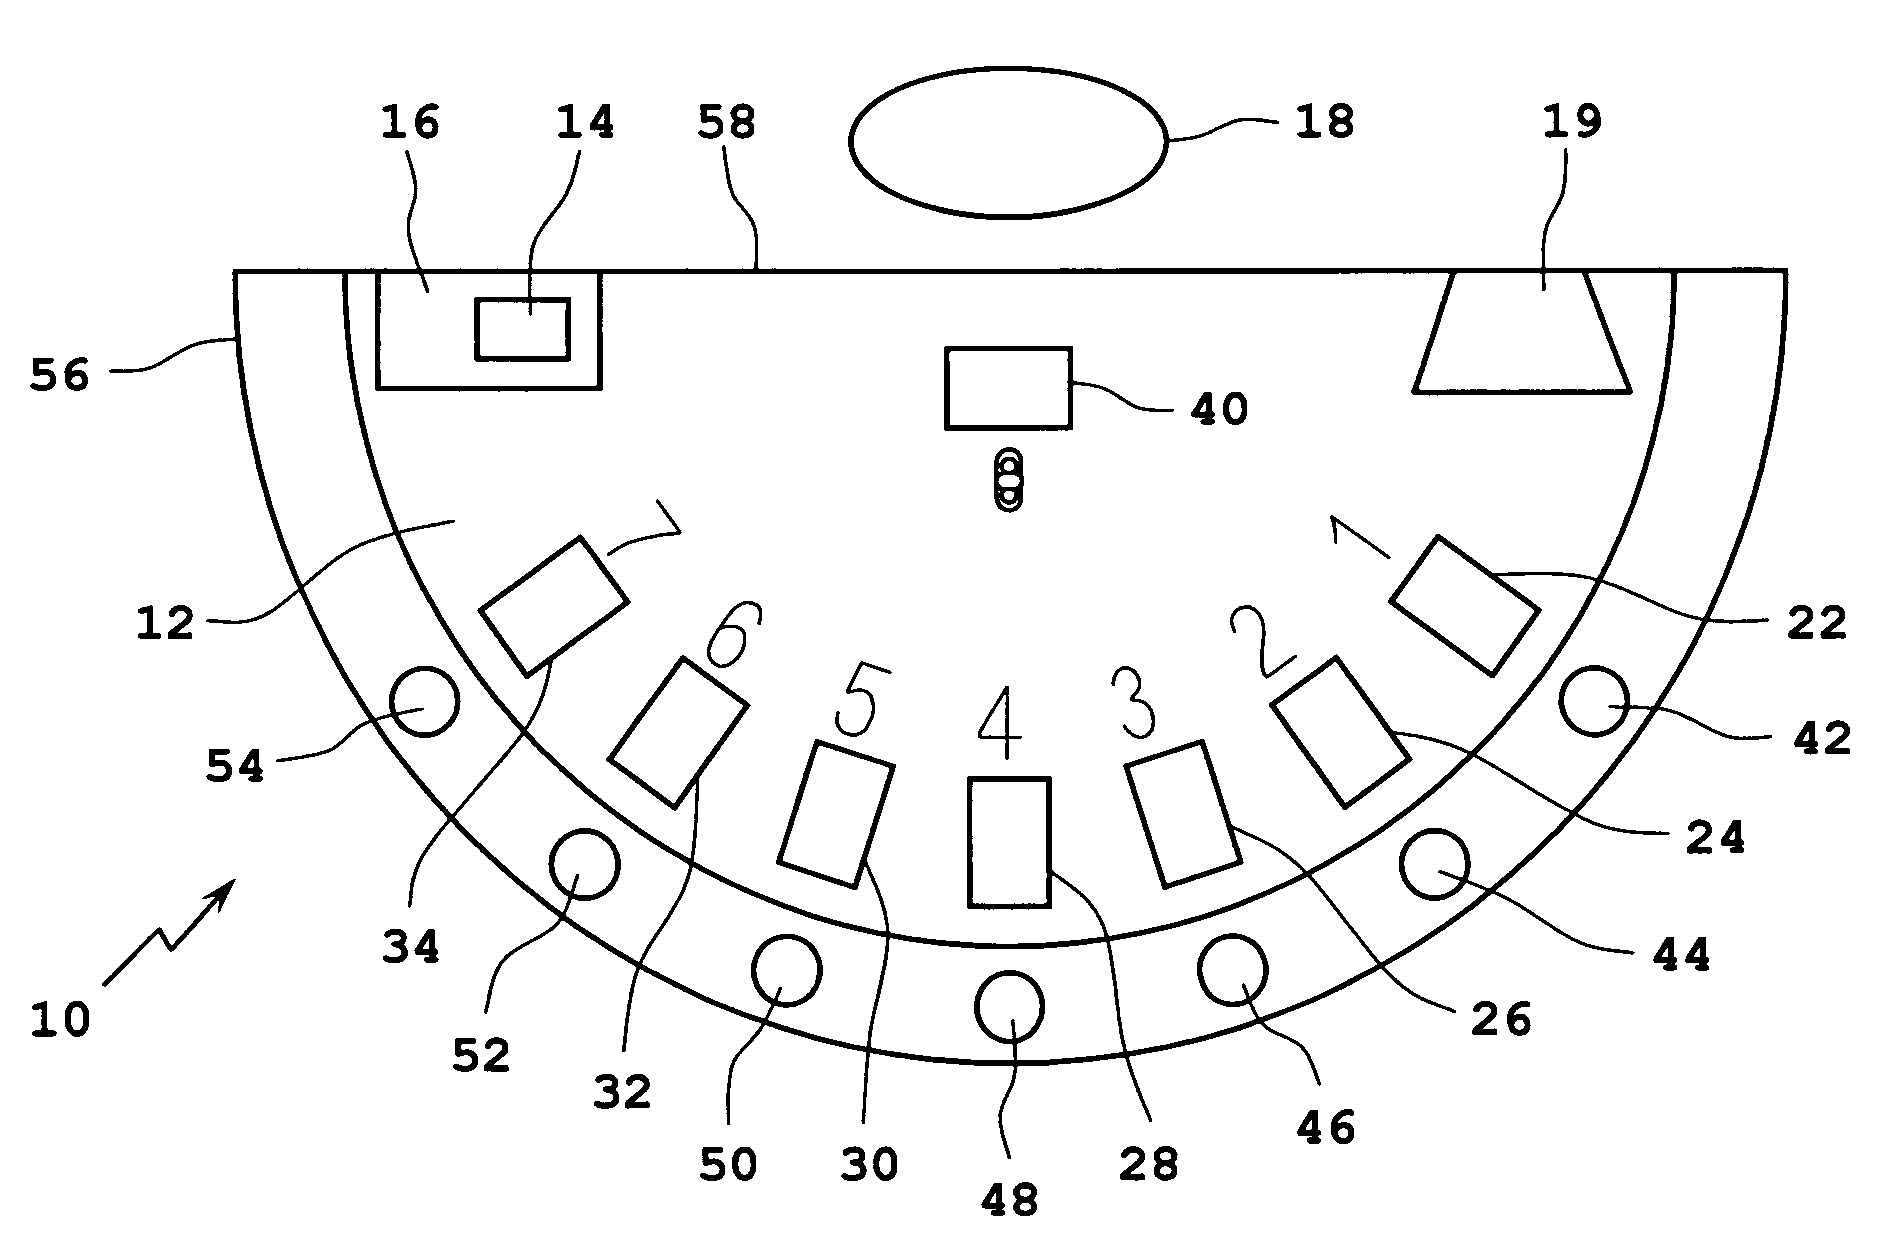 System and method for playing a table and electronic card game